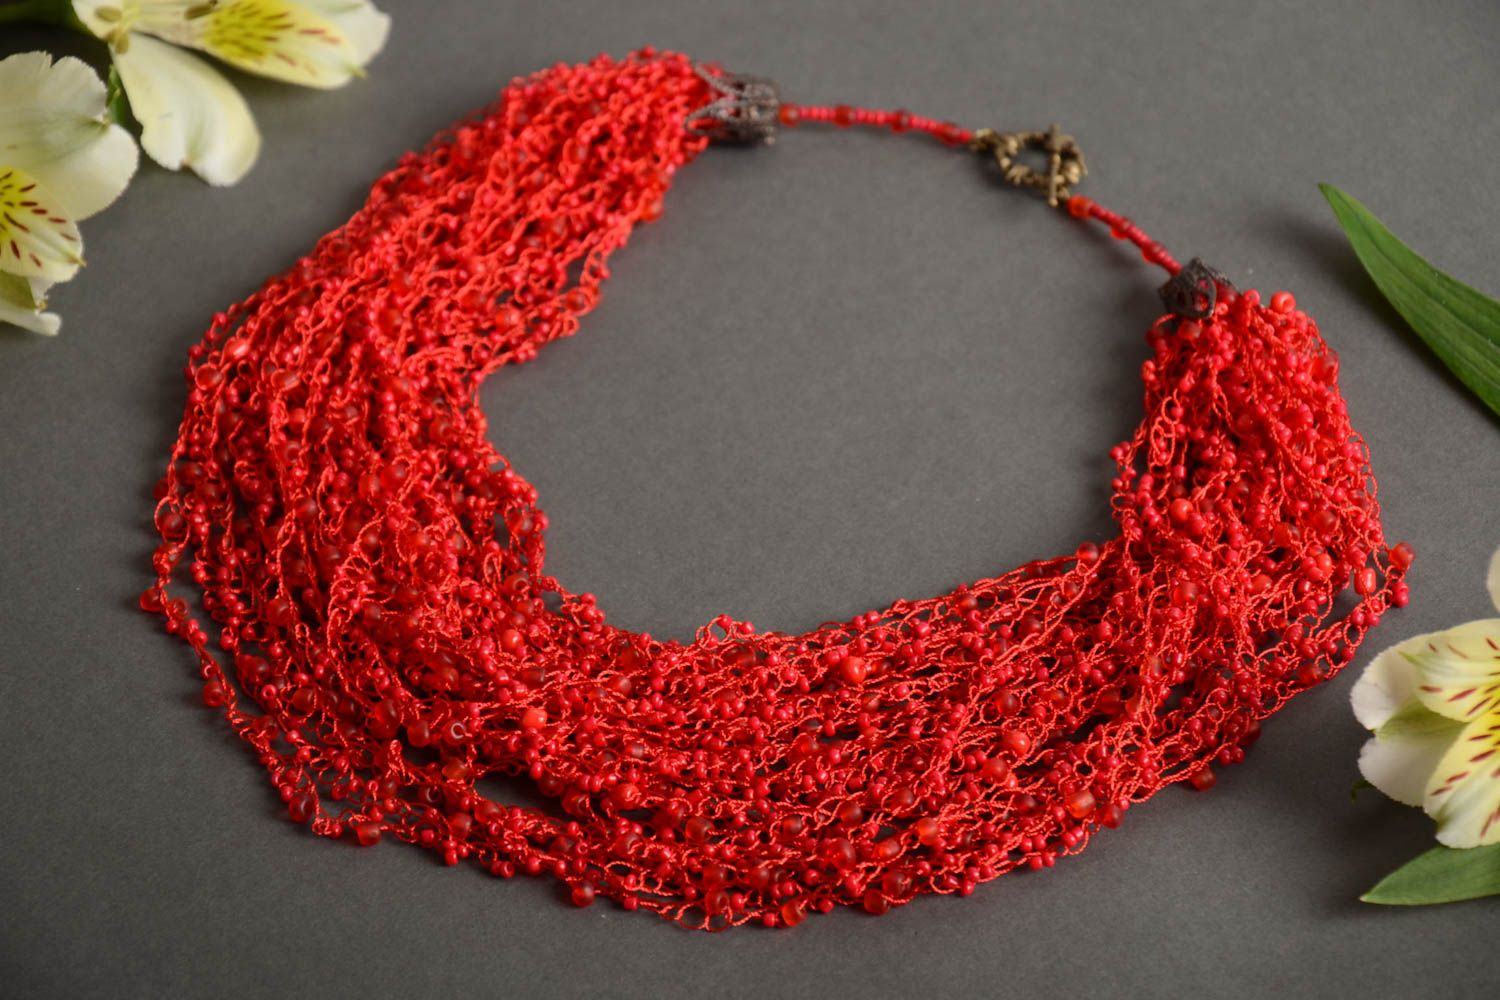 Handmade designer multi row volume airy bright red necklace crocheted of beads photo 1